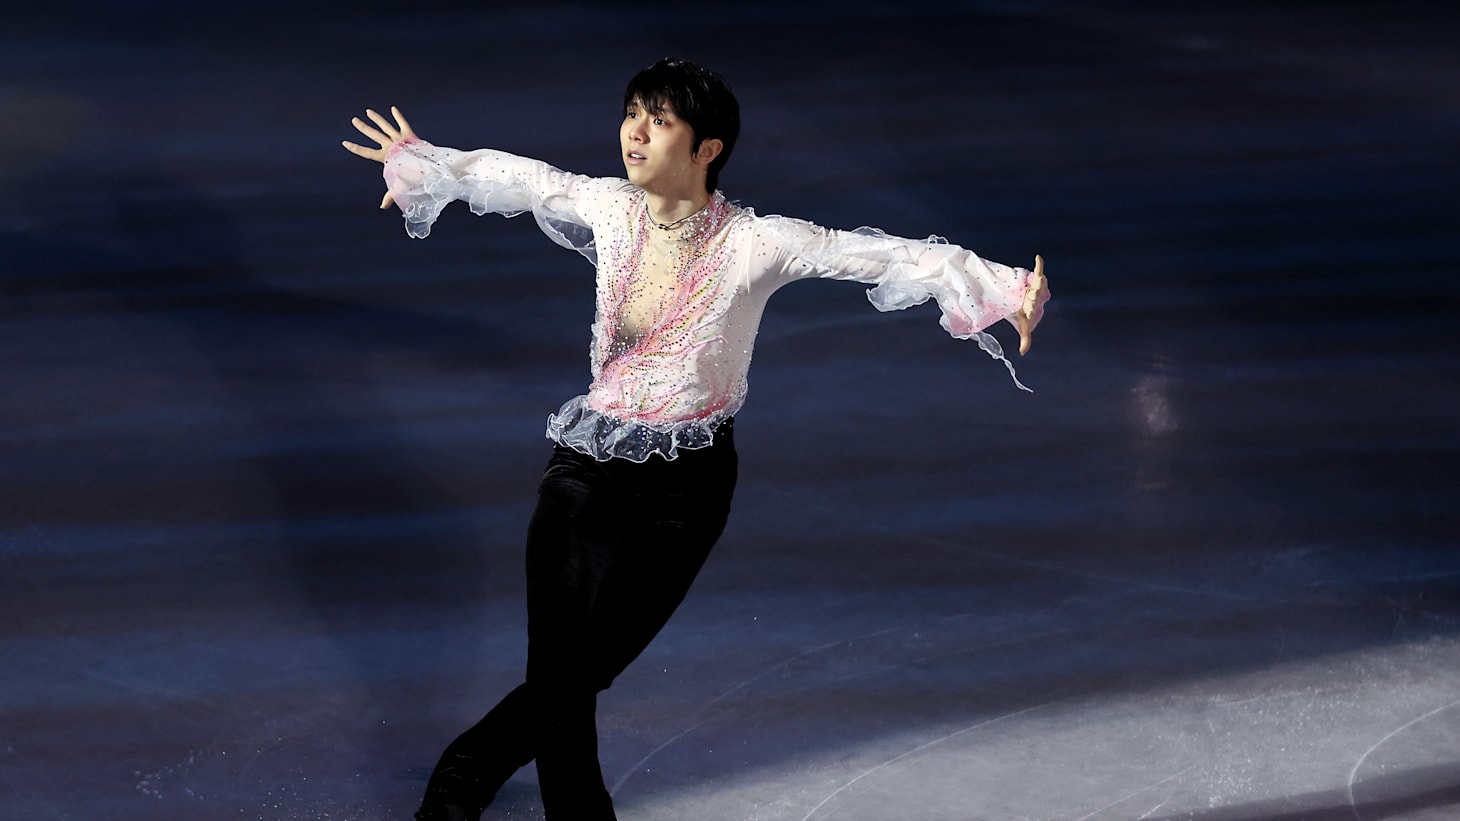 Hanyu Yuzuru announces 1st professional ice show and makes debut on Instagram and Twitter